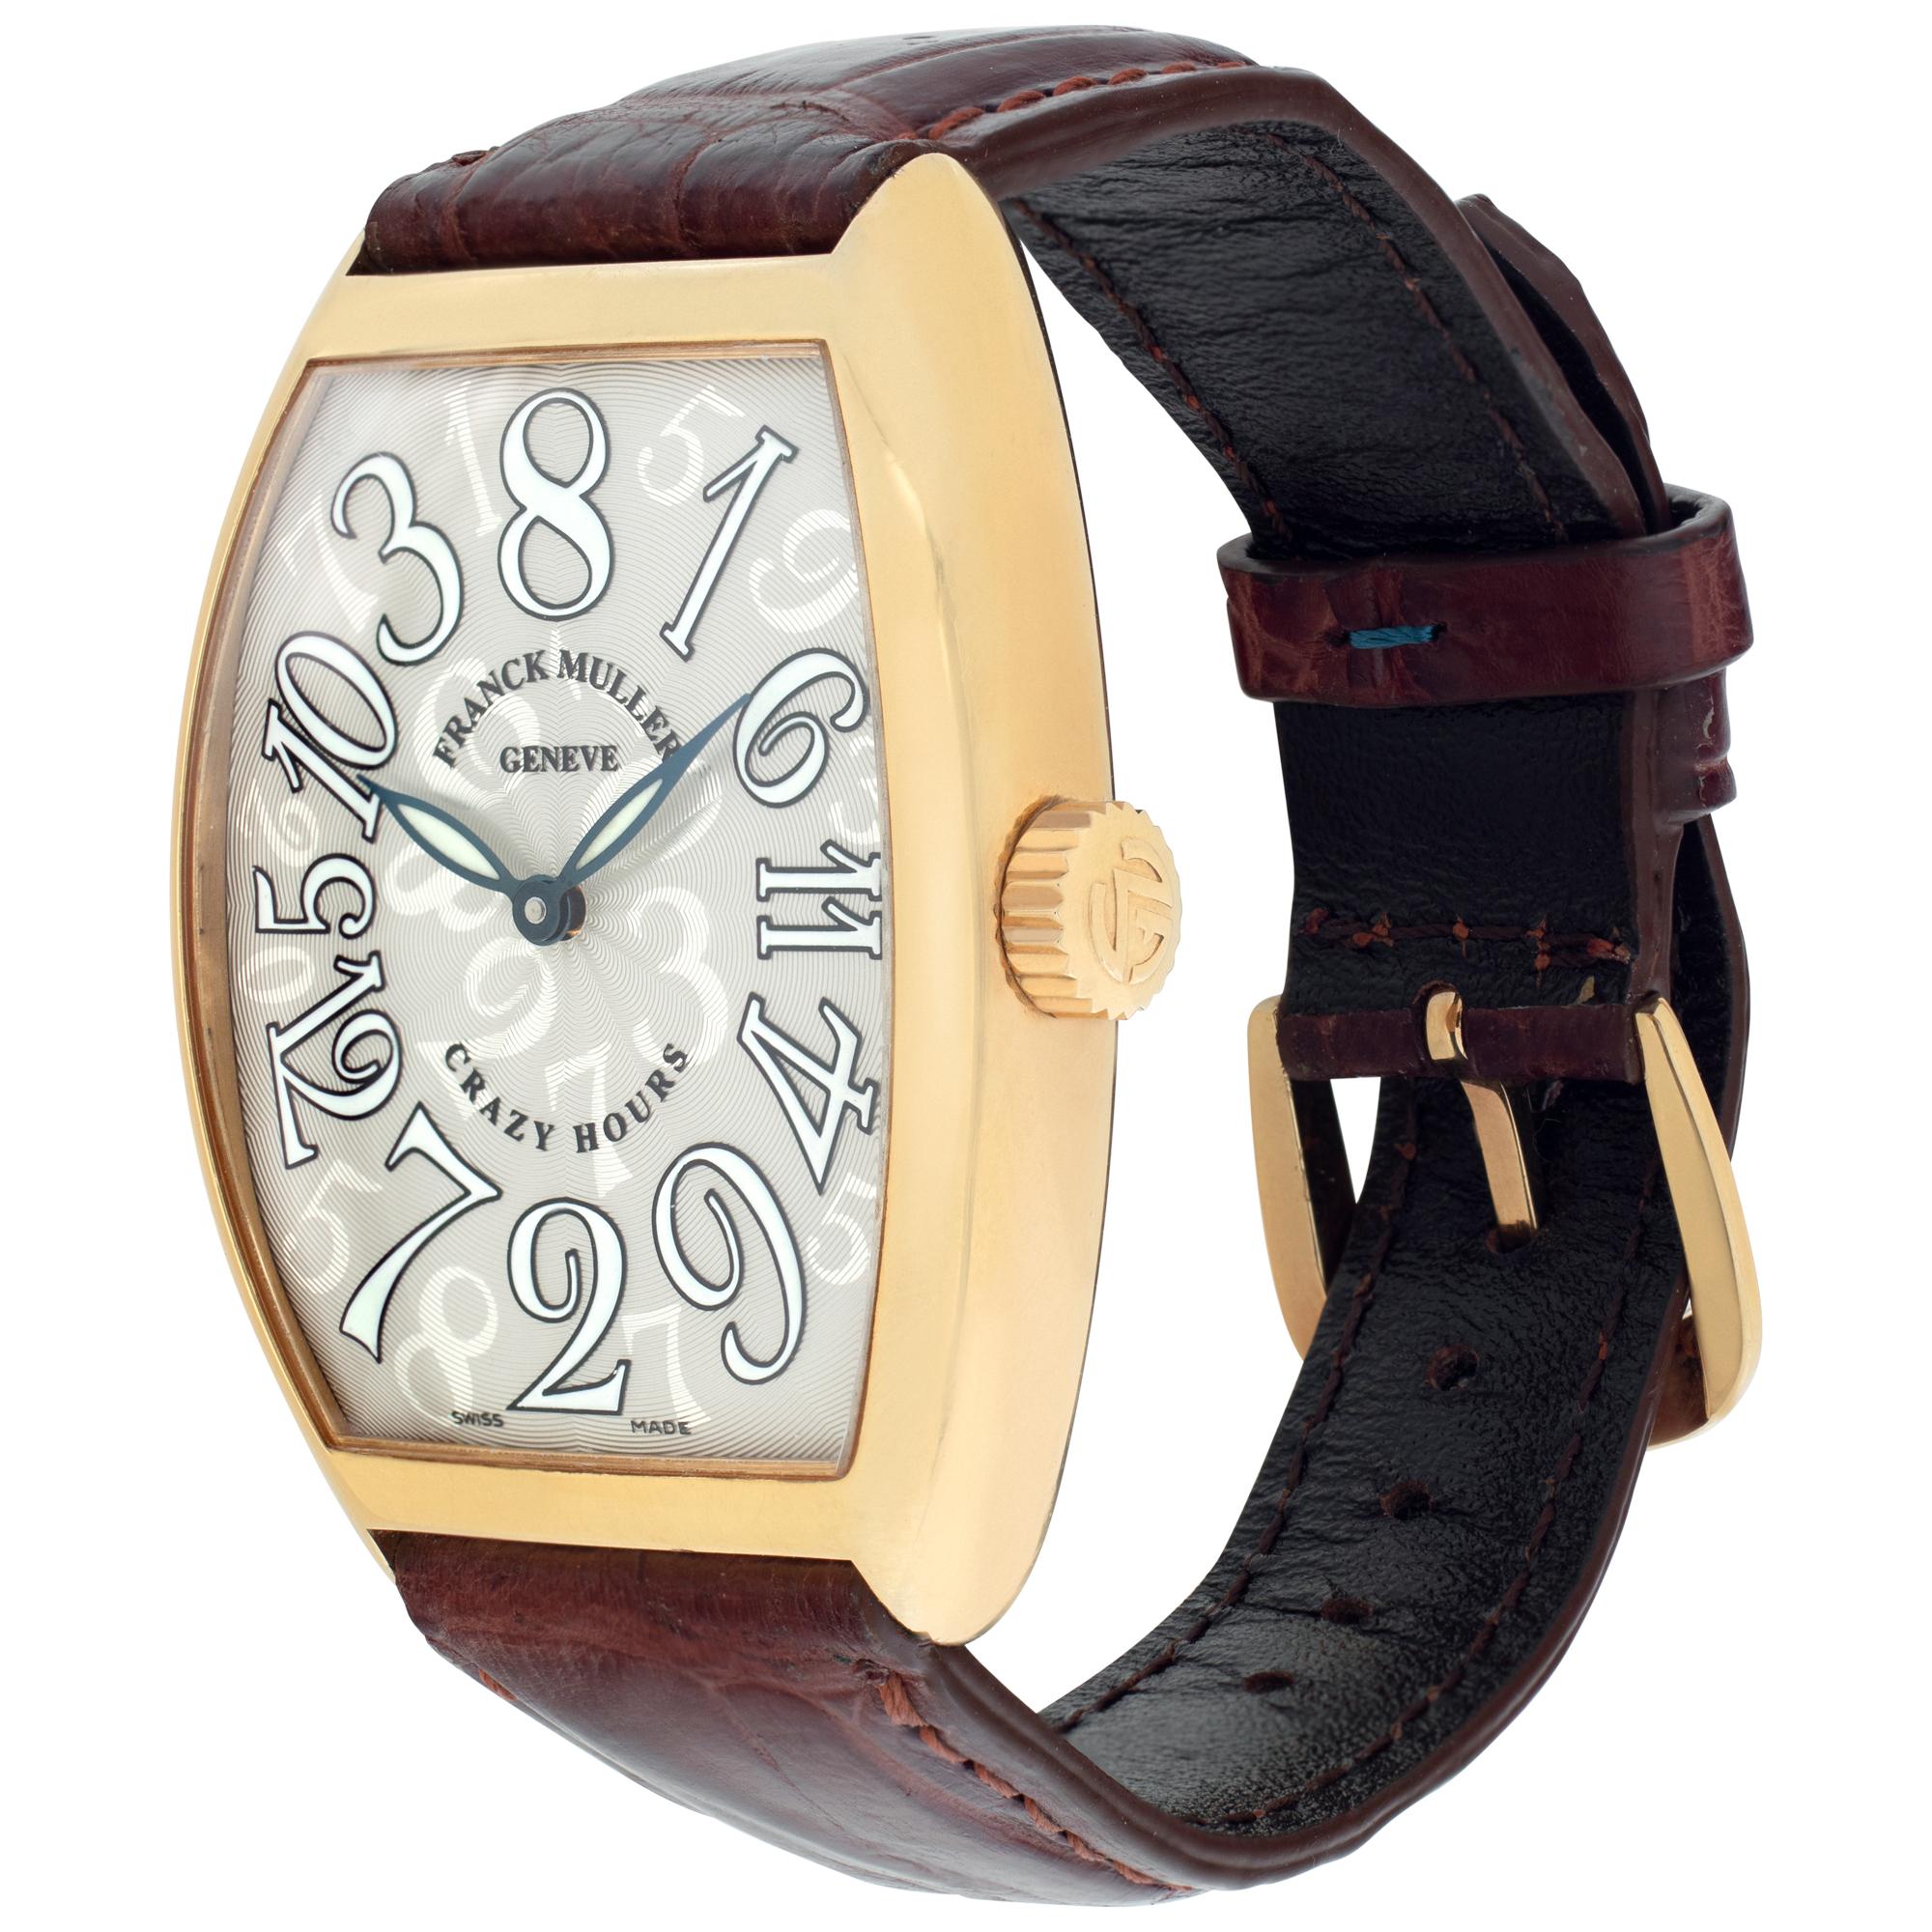 Franck Muller Crazy Hour in 18k rose gold on leather strap with FM 18k tang buckle. Auto. 34.5 mm x 41.5 mm case size. Ref 7851. Fine Pre-owned Franck Muller Watch. Certified preowned Dress Franck Muller Crazy Hour 7851 watch on a Brown Leather